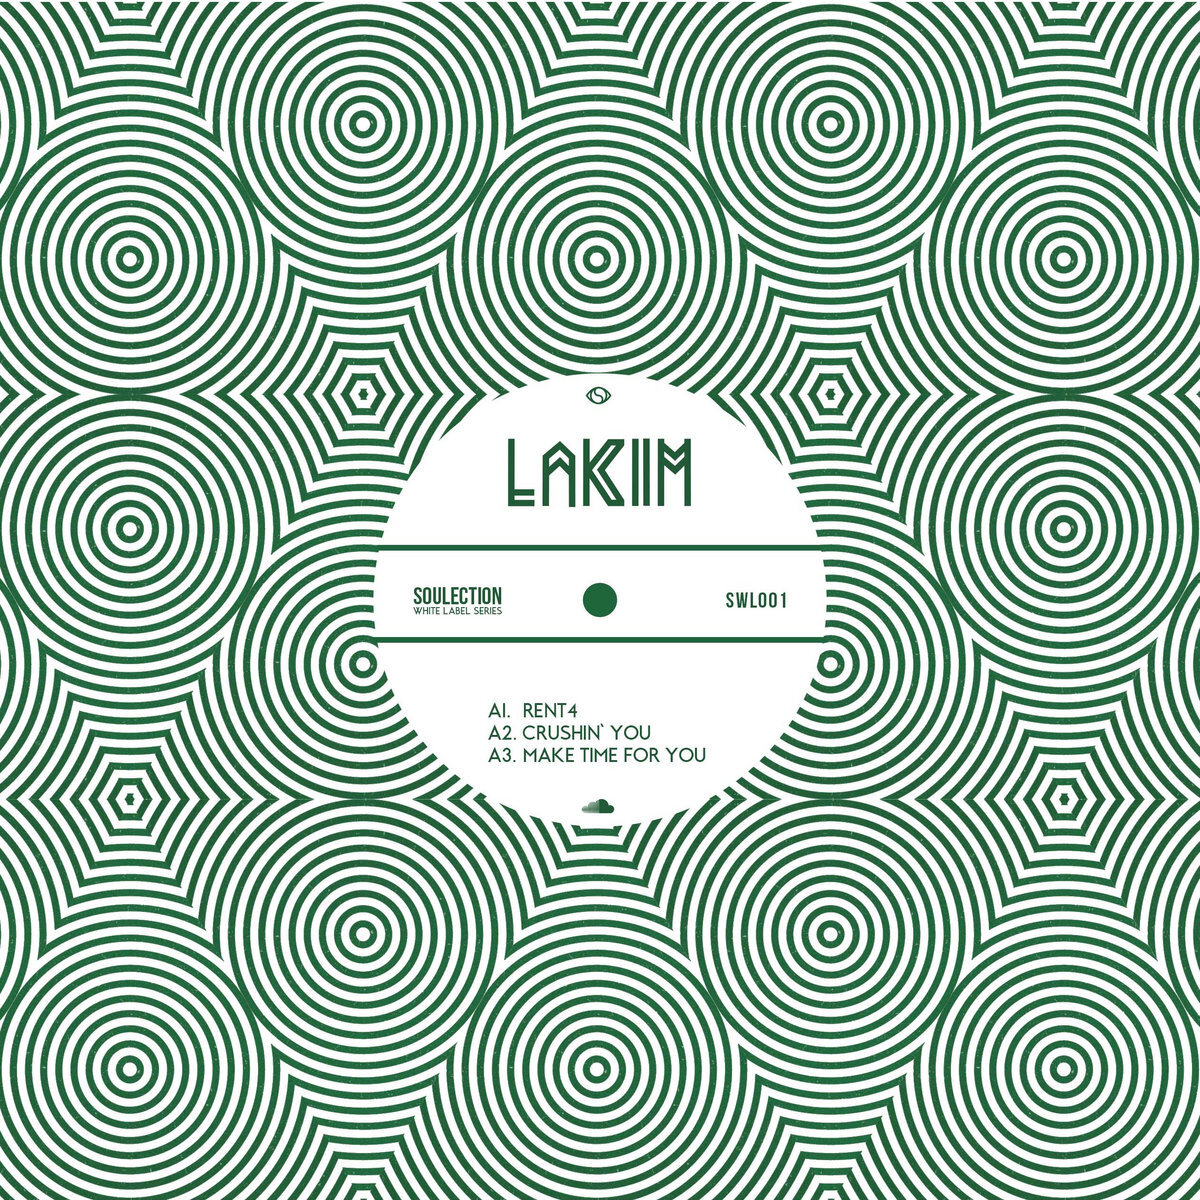 SWL 001 (Soulection White Label) (2013)